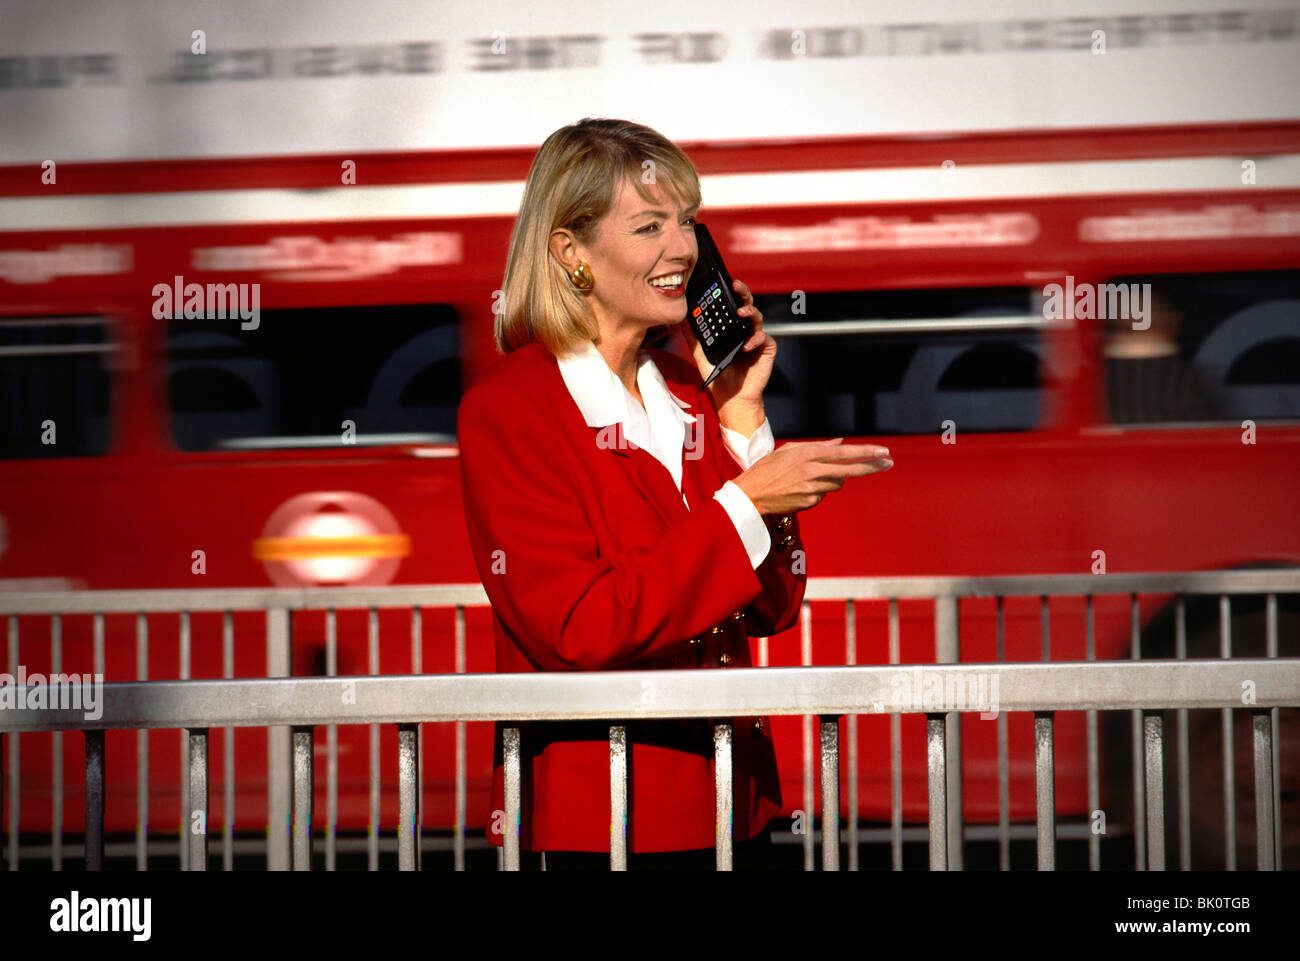 LIFESTYLE FASHION TECHNOLOGY 1980s  MOTOROLA FLIP PHONE 1980's advertising image illustrating business executive woman talking with London red bus speed blurred behind with early first generation flip open mobile cell telephone London UK Stock Photo